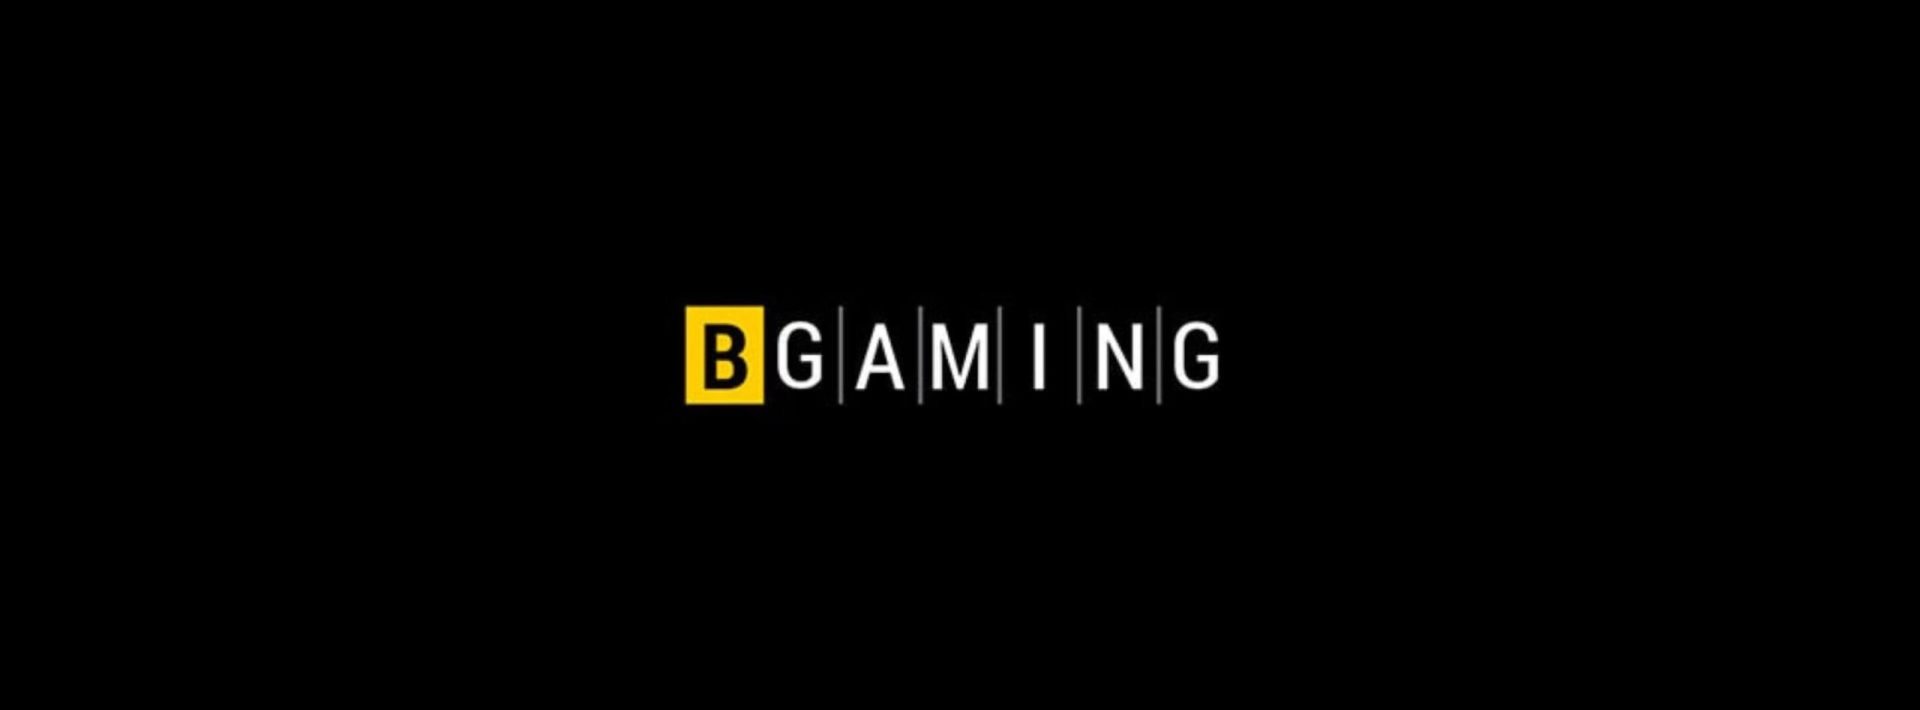 BGaming teams with crypto casino for new slot game